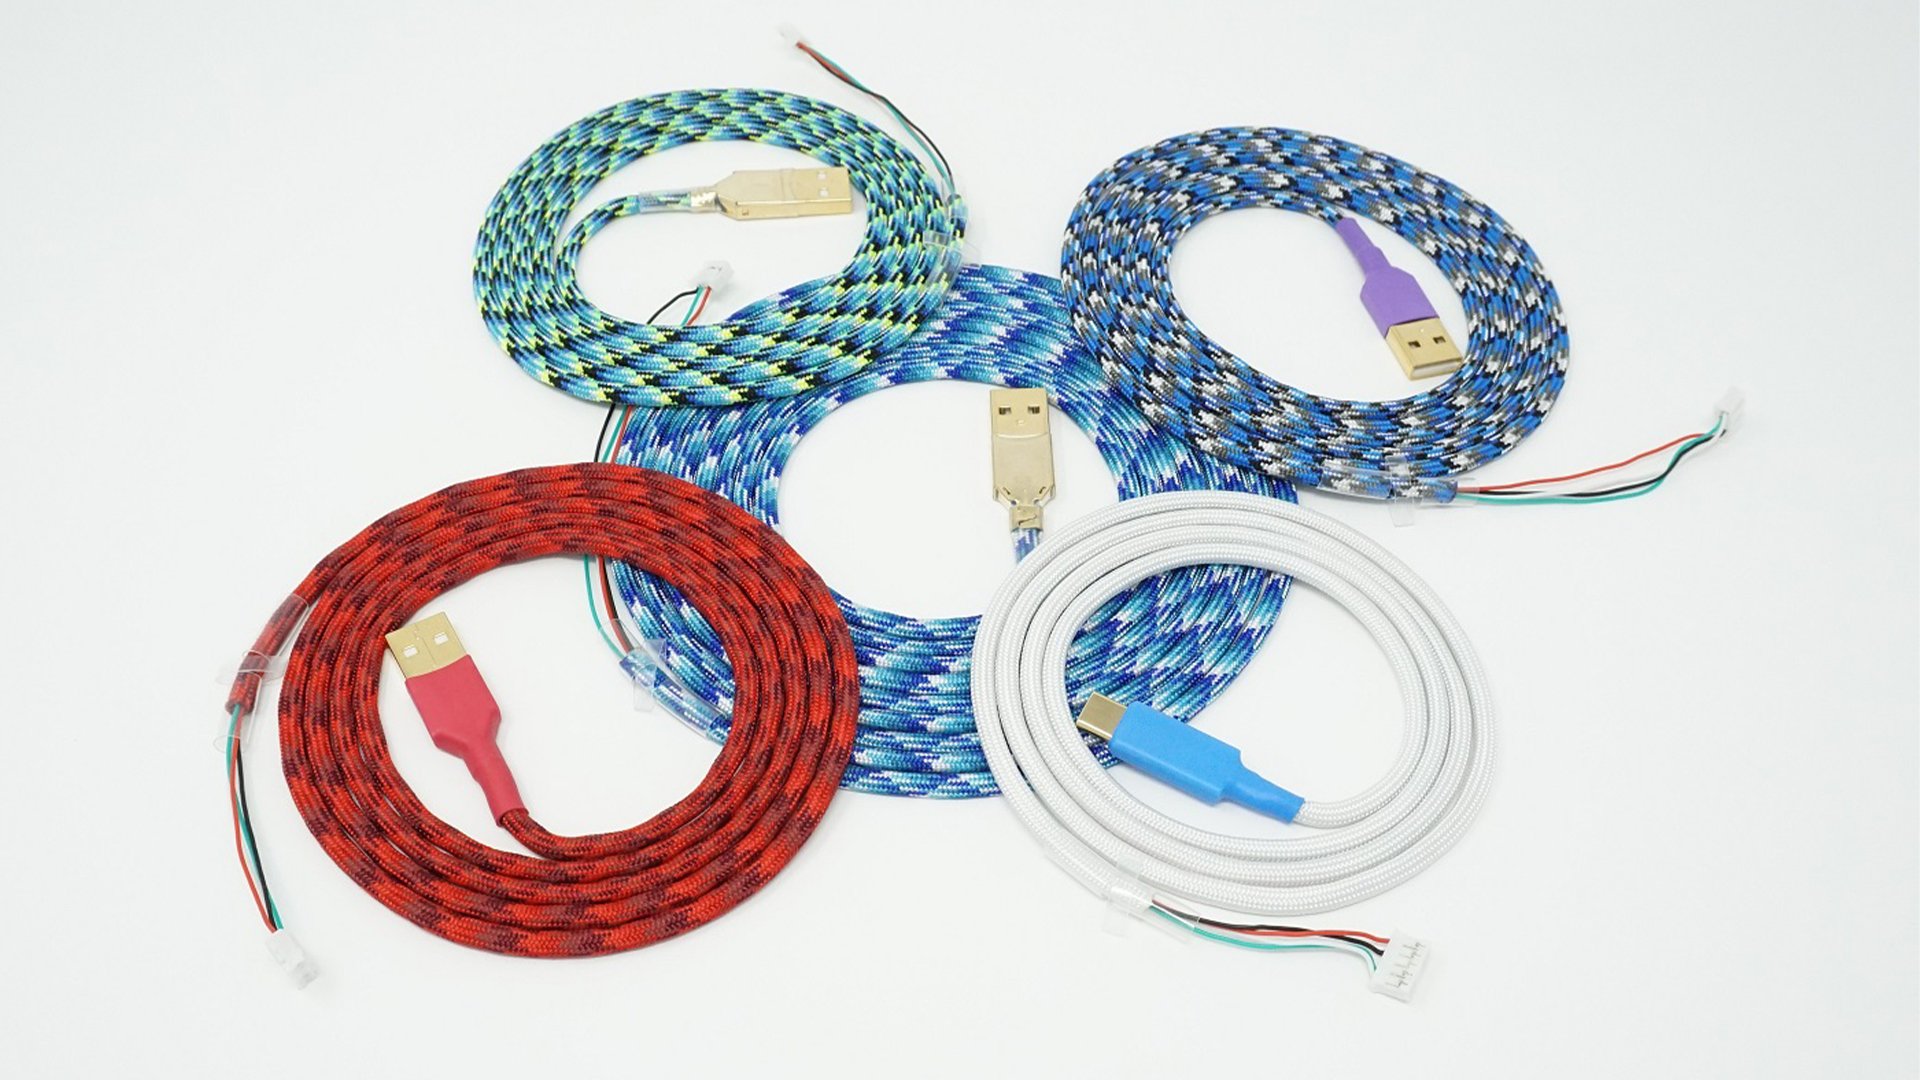 Which Type of Cable Do I Need? – Paracable